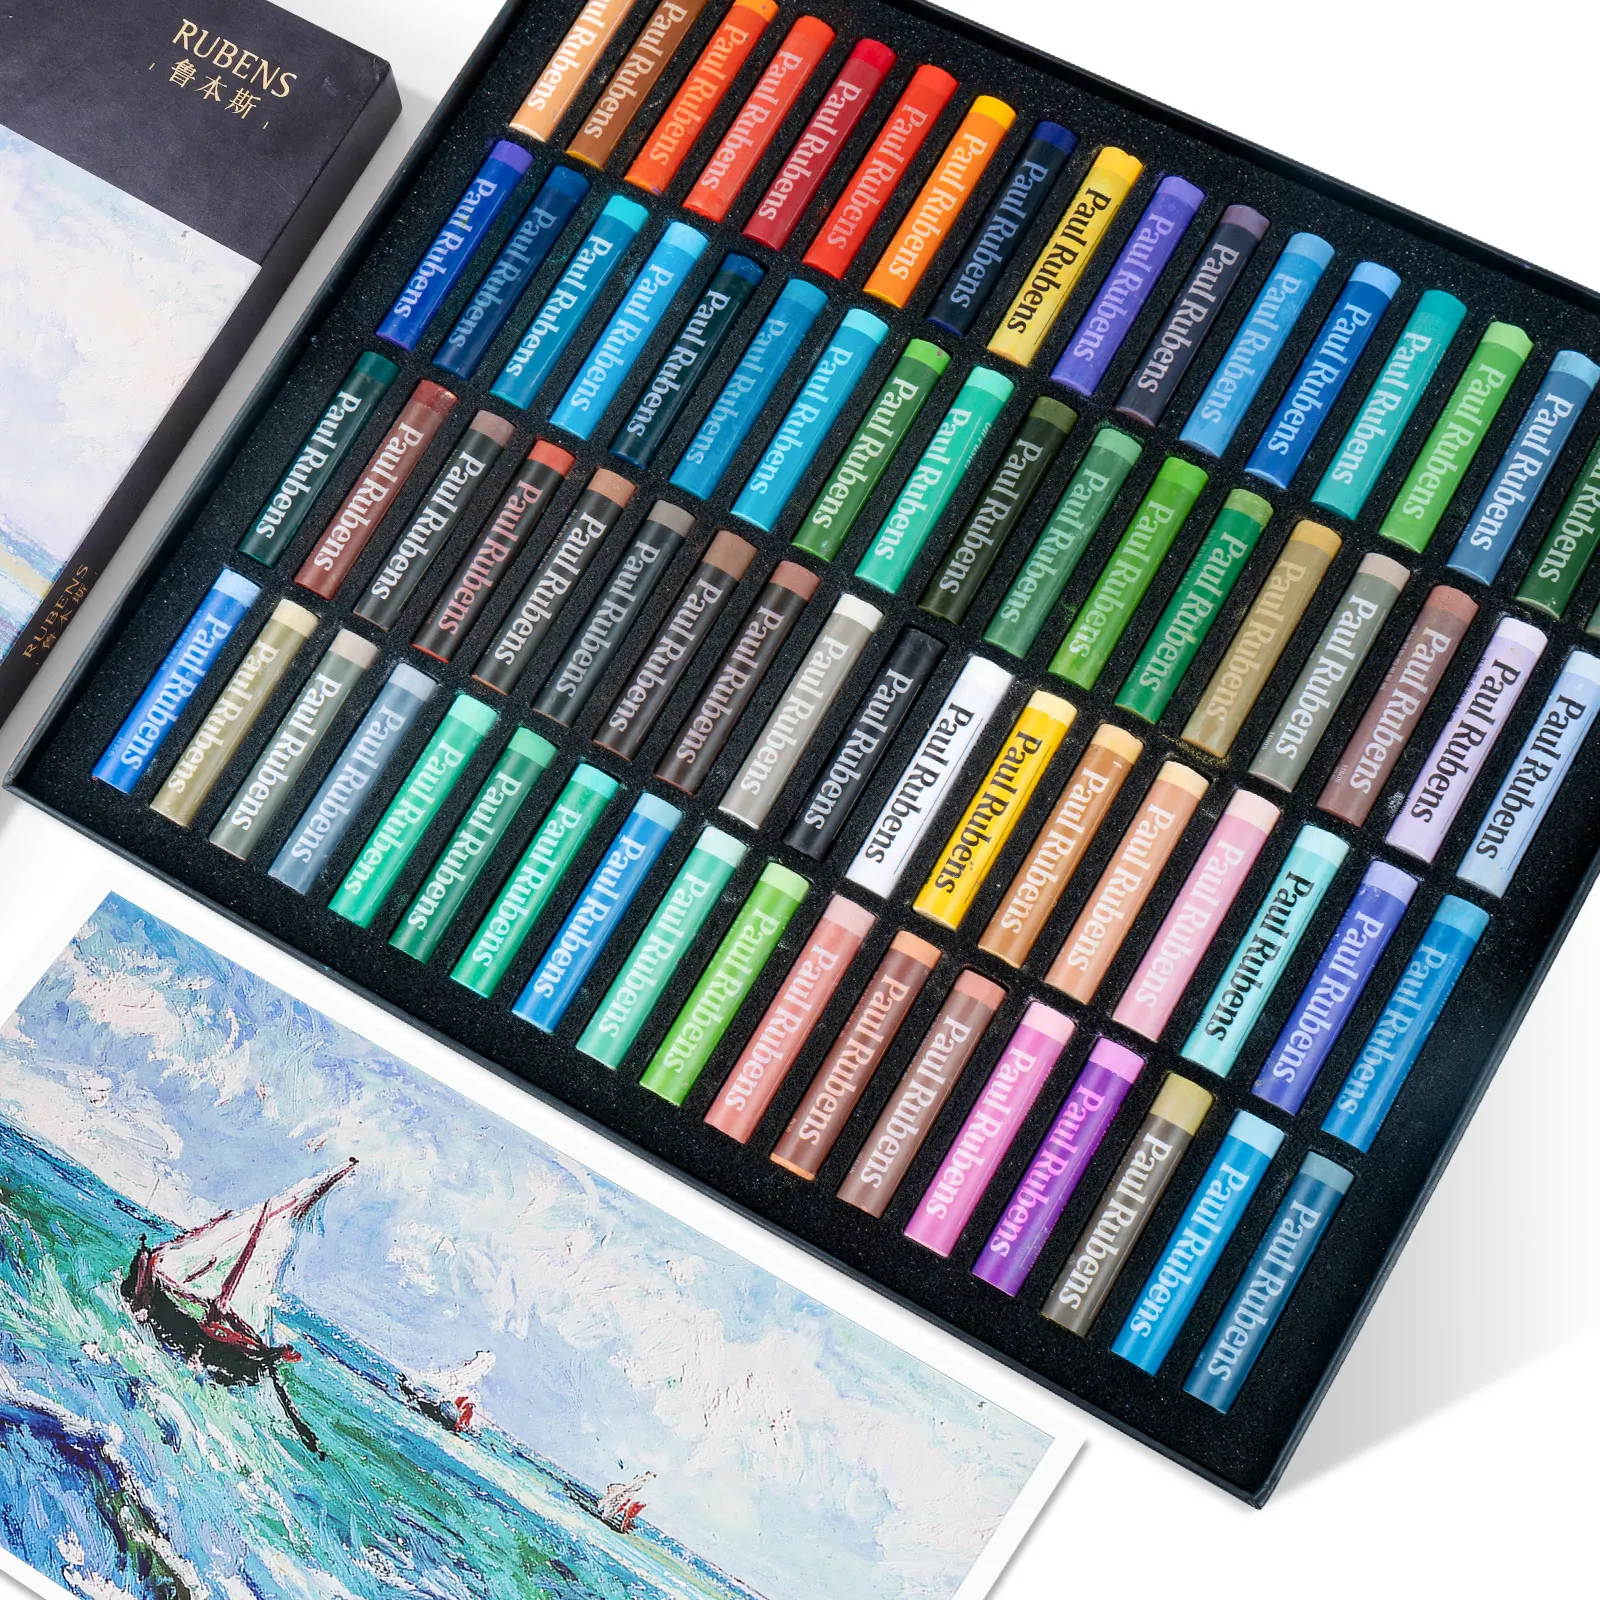 Paul Rubens 72 Colors Oil Pastel Professional Soft Oil Crayons for Painting Seascape Artist Art Supplies